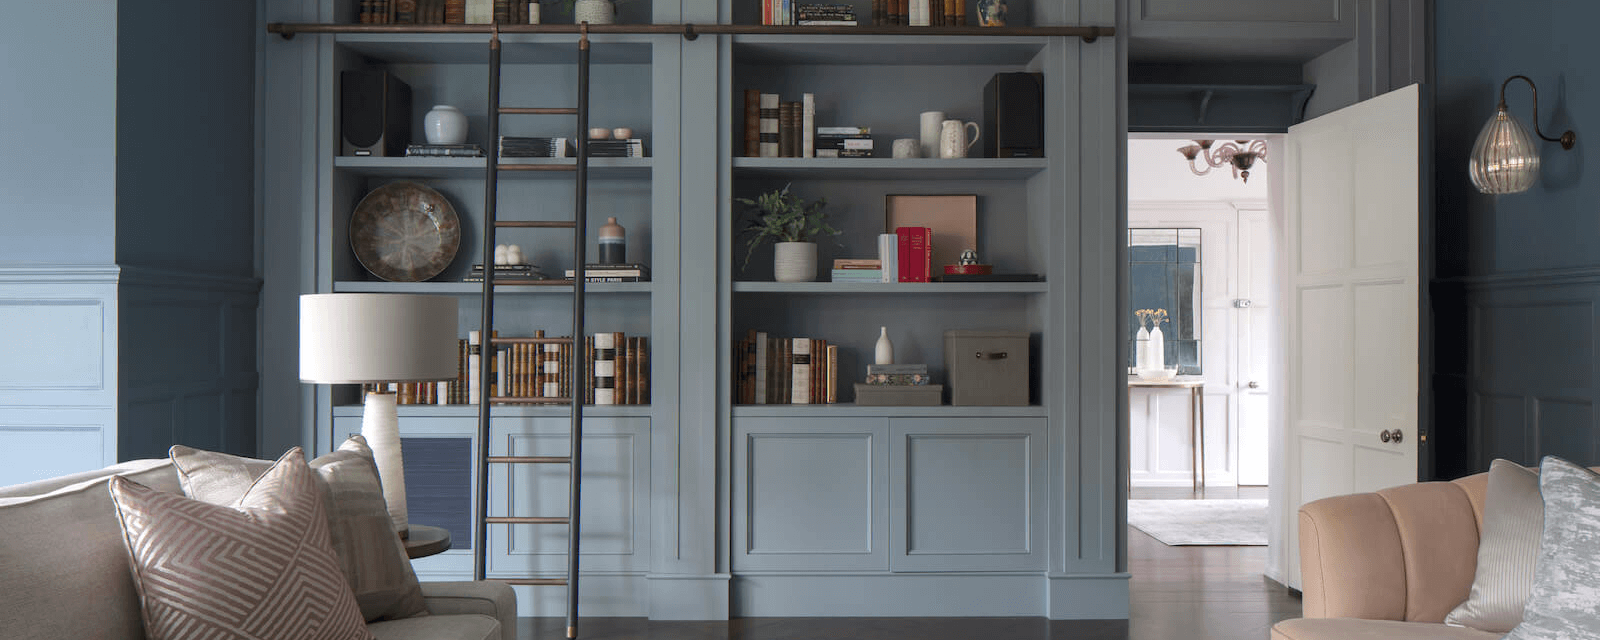 Harrogate living room design with sofa and cupboard